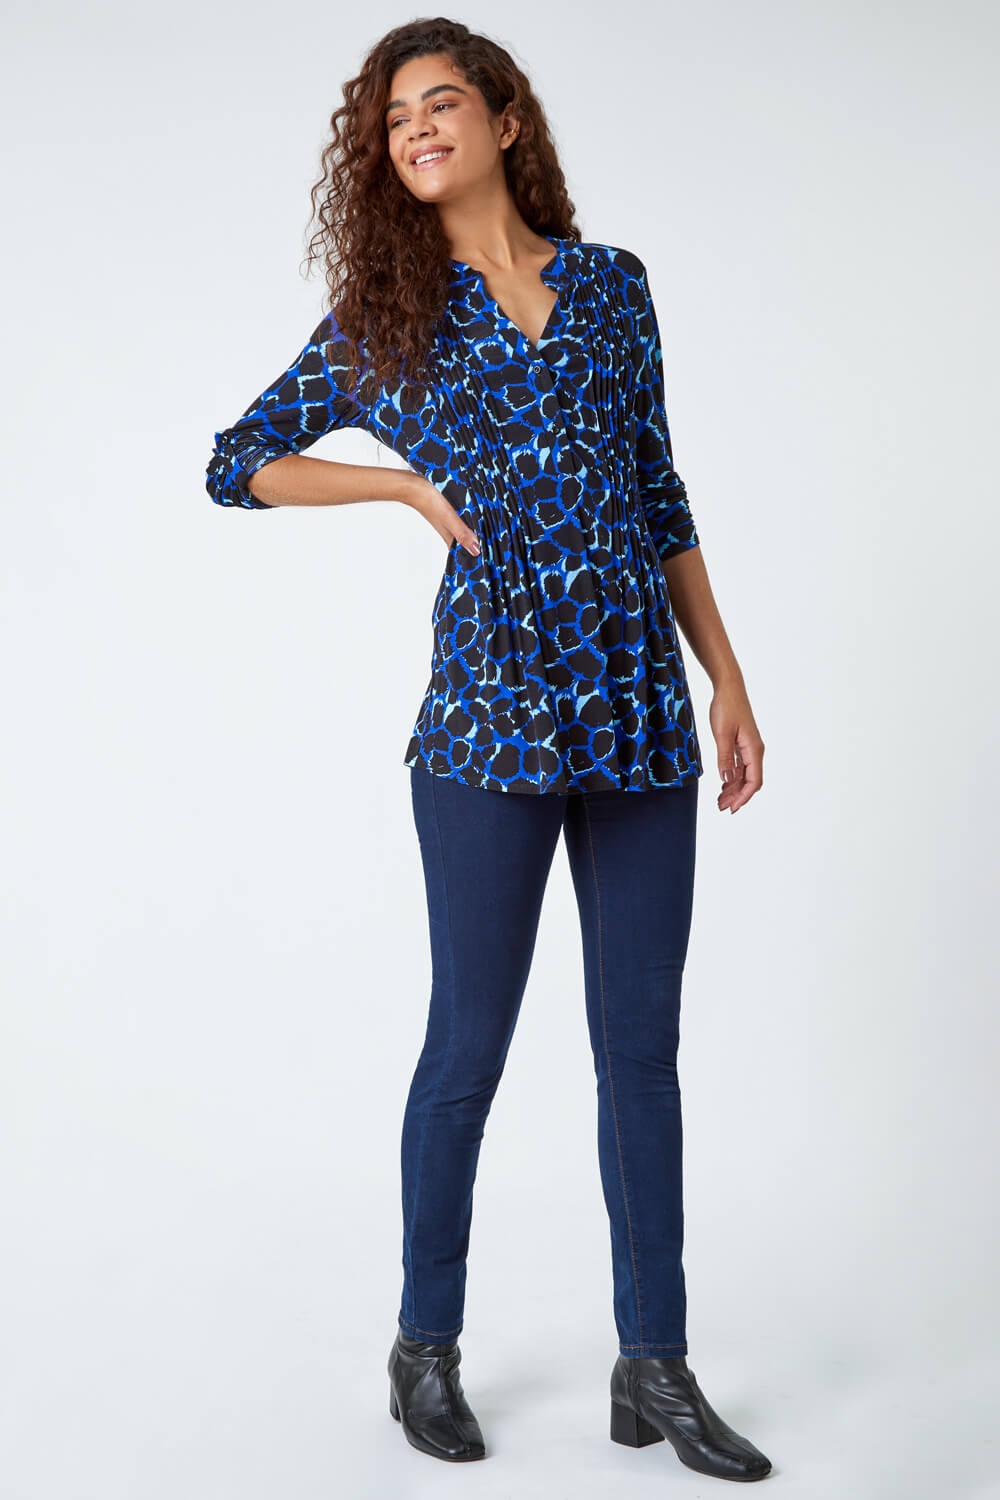 Blue Pebble Print Pintuck Stretch Top, Image 2 of 5